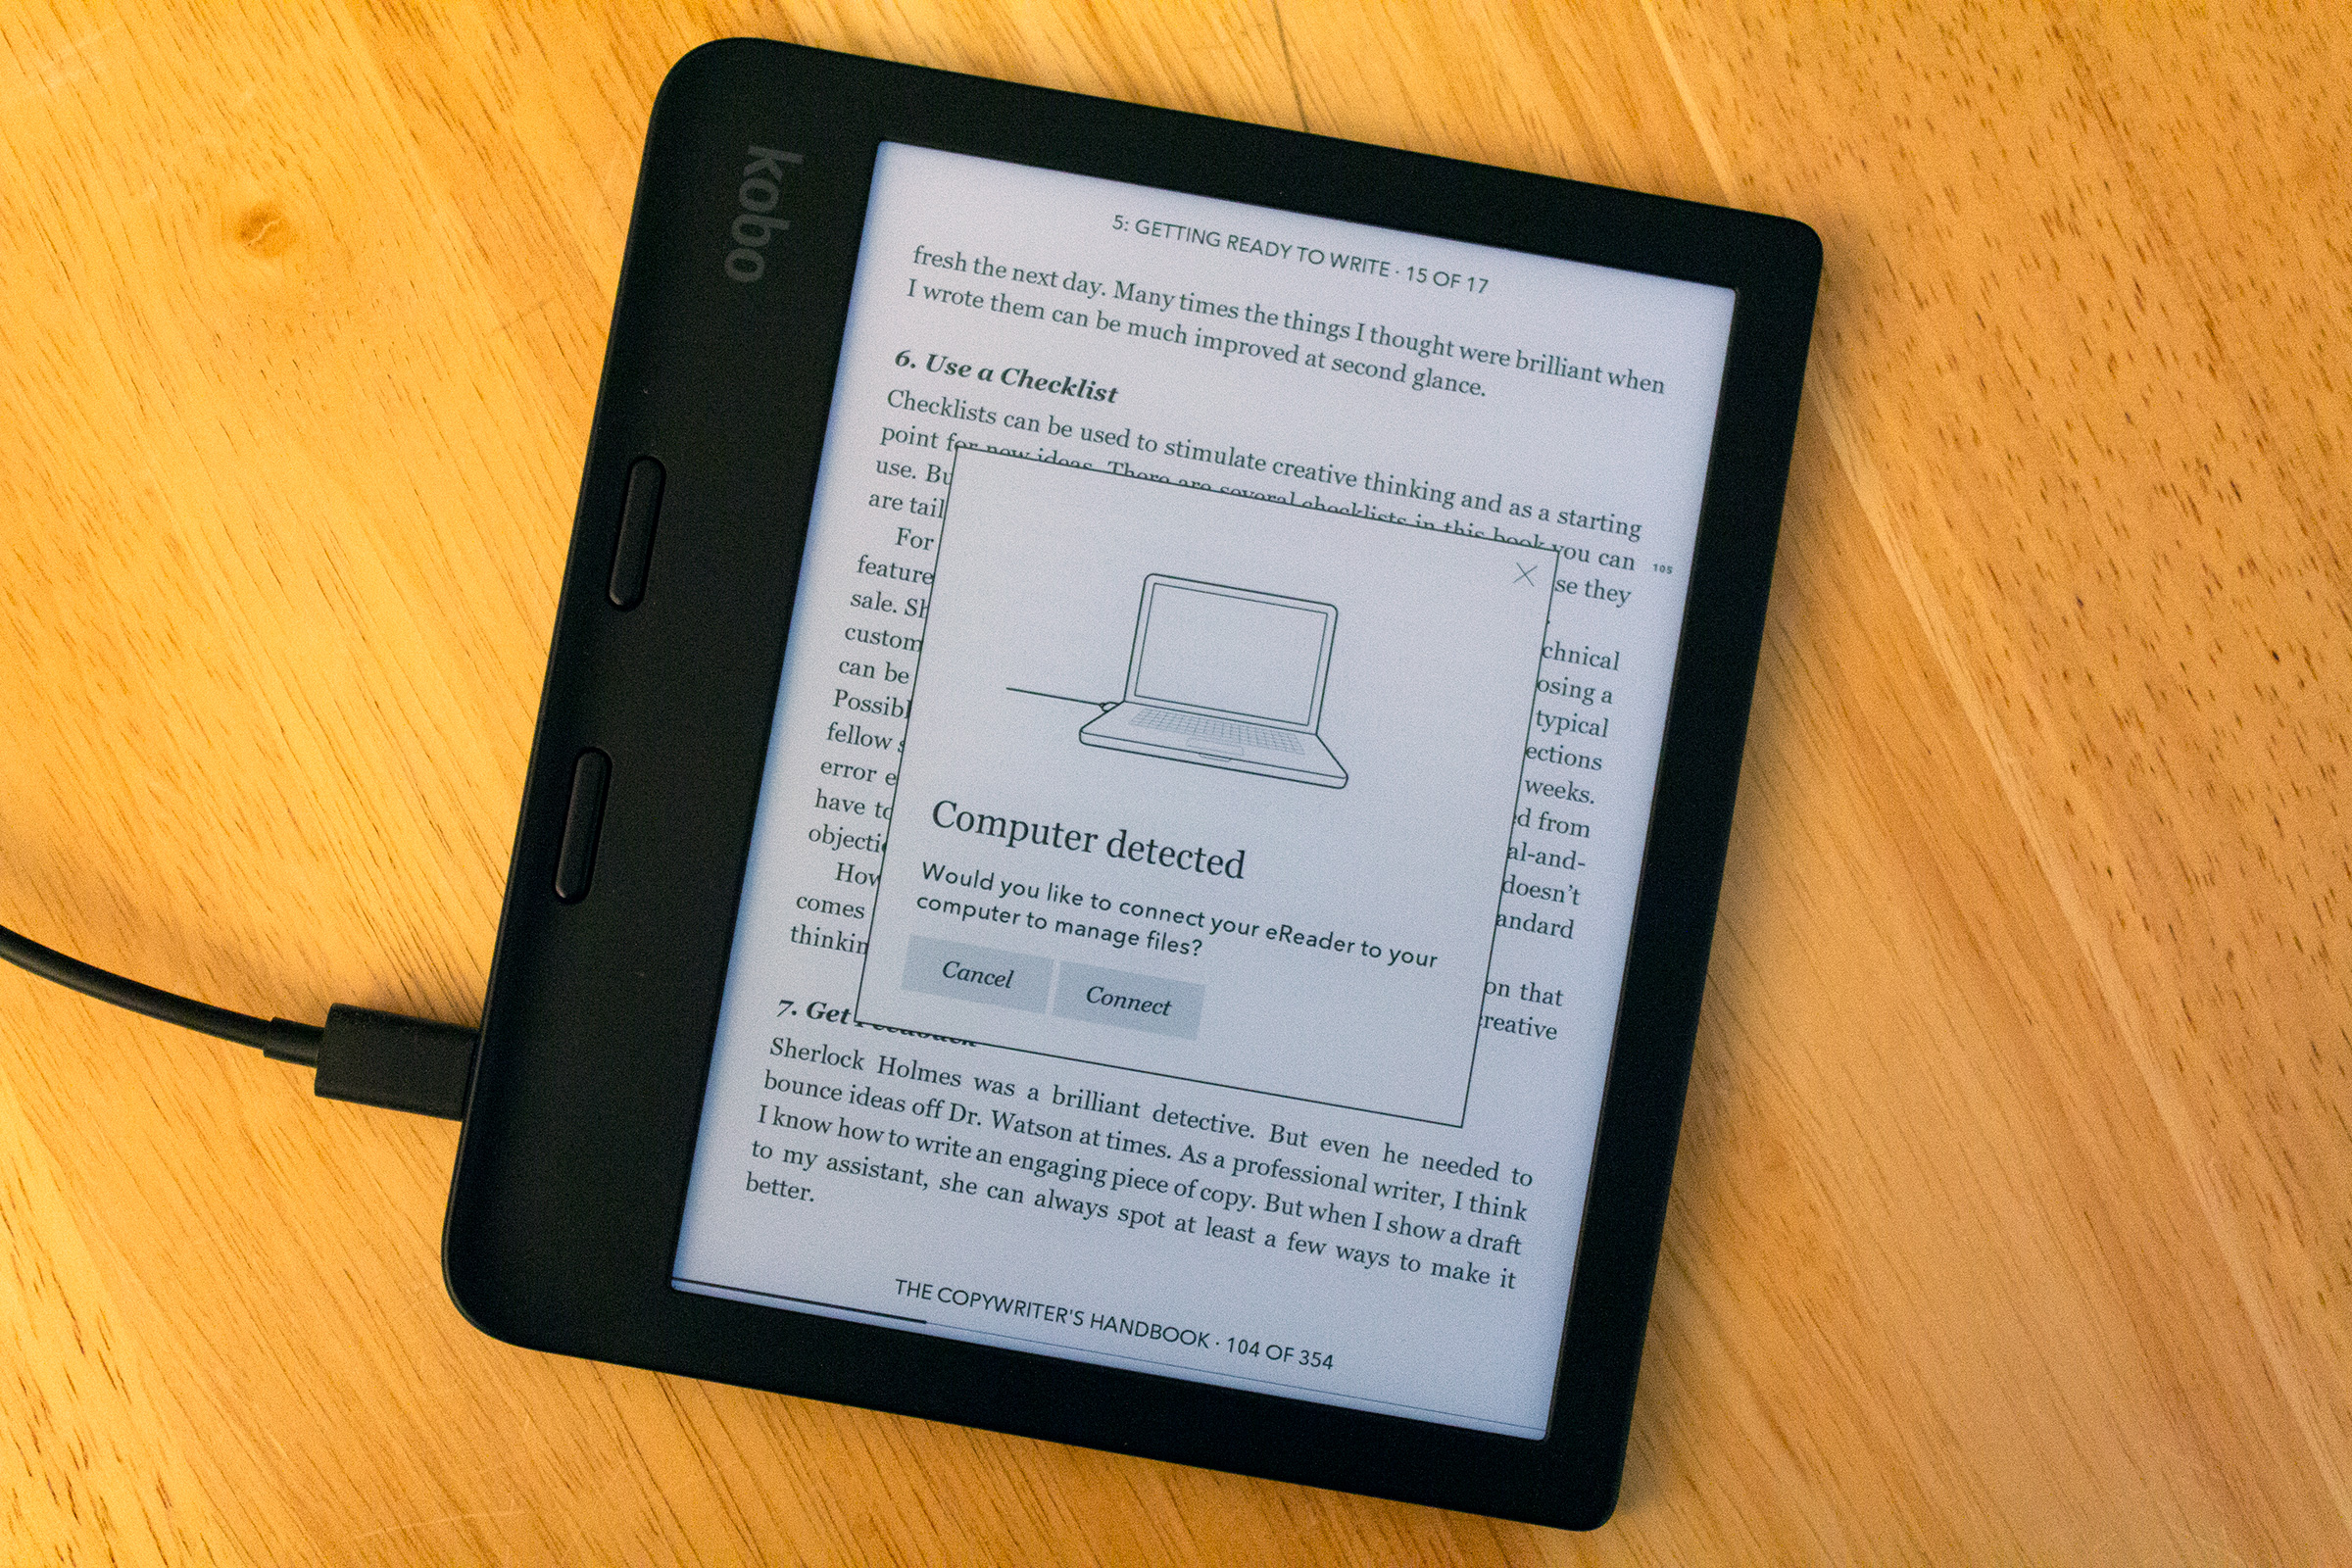 How to add custom screensaver images to your Kobo e-reader | Techplayce